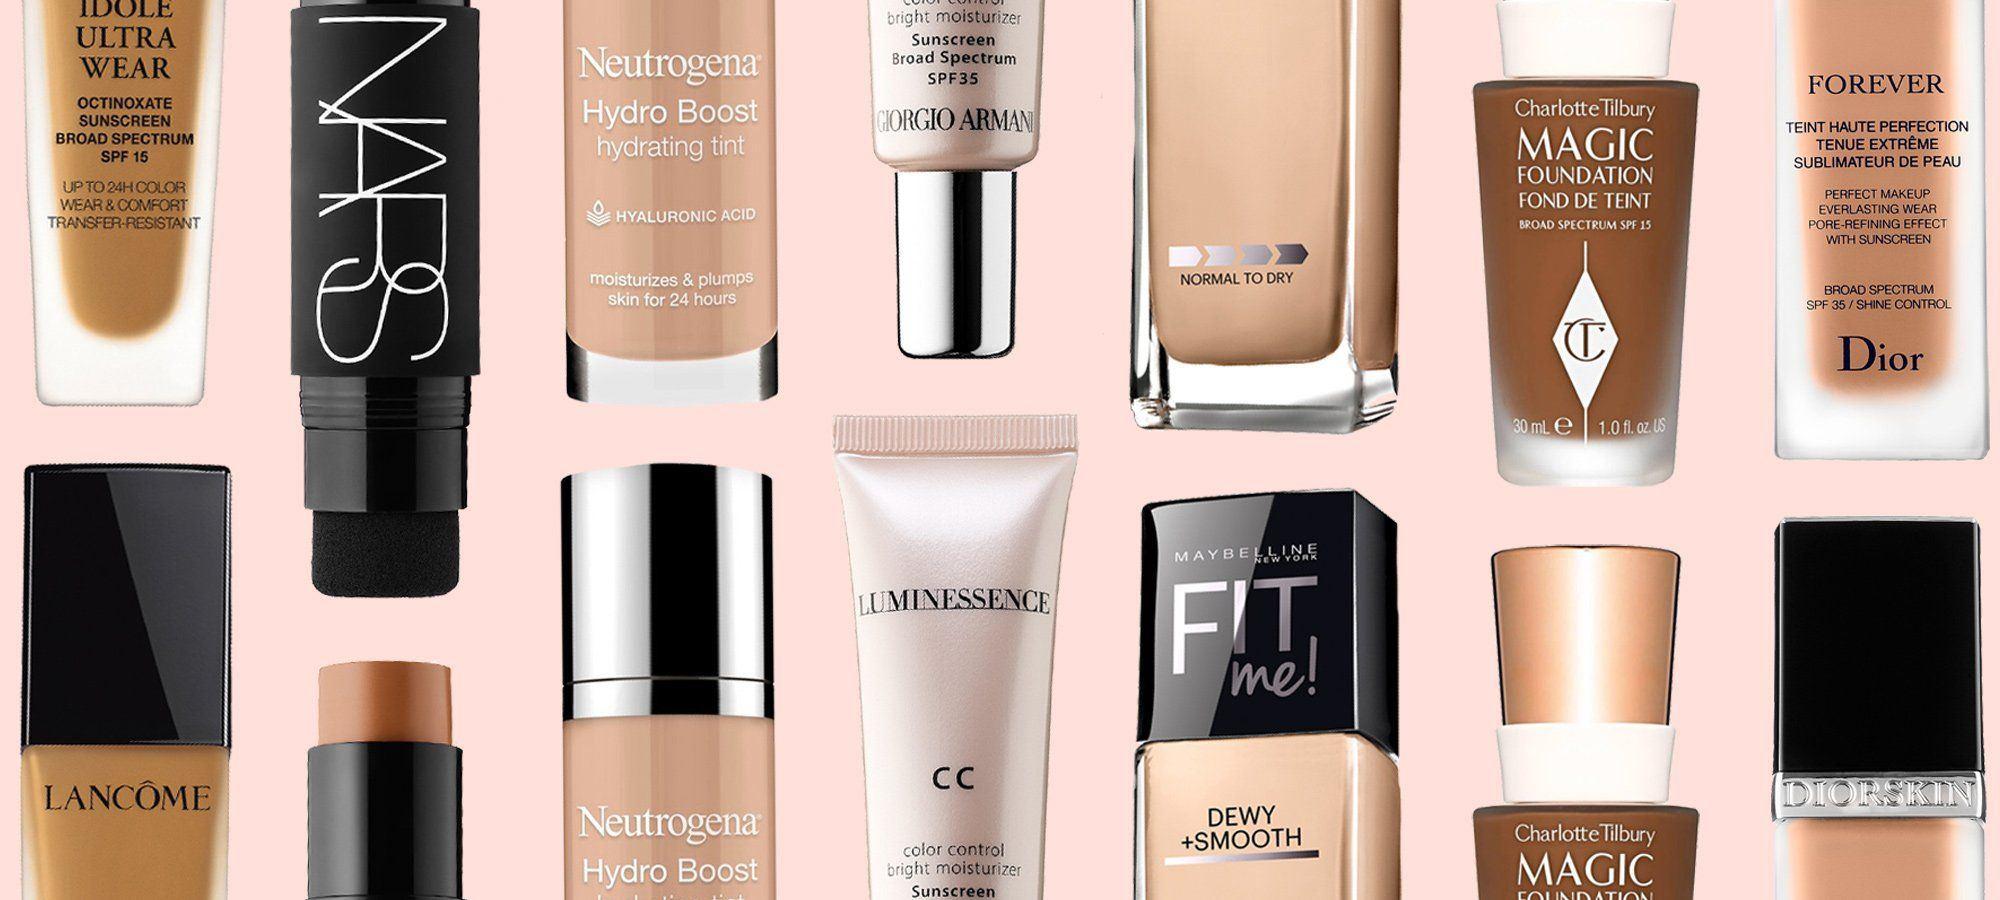 Buzz recommend best of makeup for foundation mature skin Best